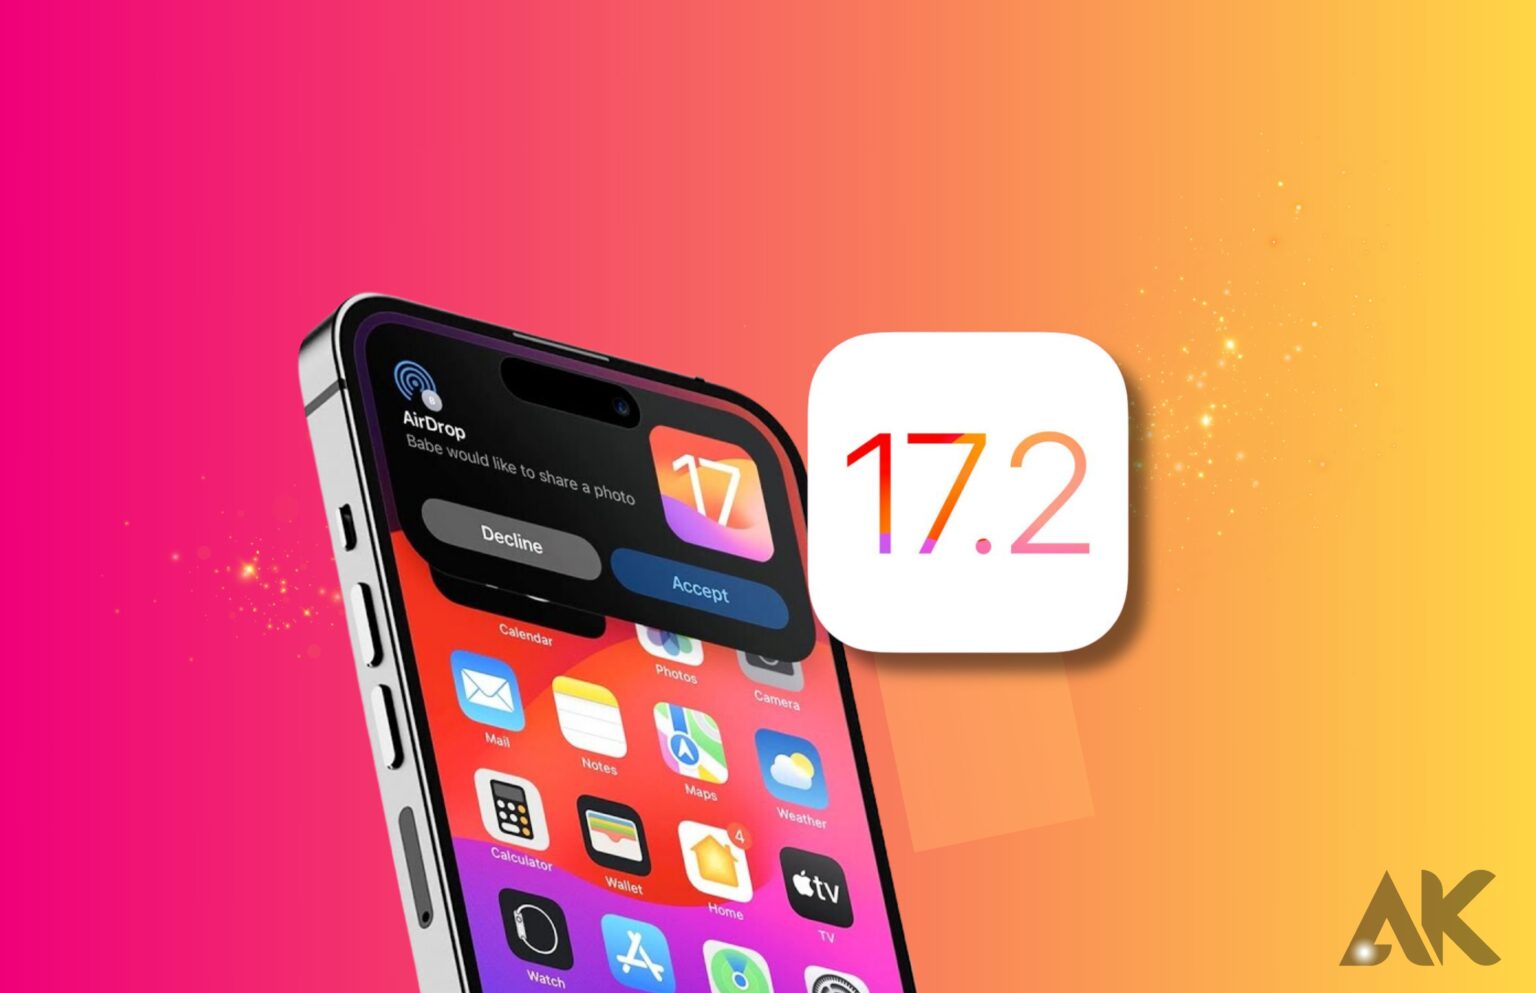 iOS 17.2 Beta Release Date: When Can You Try the New Features?